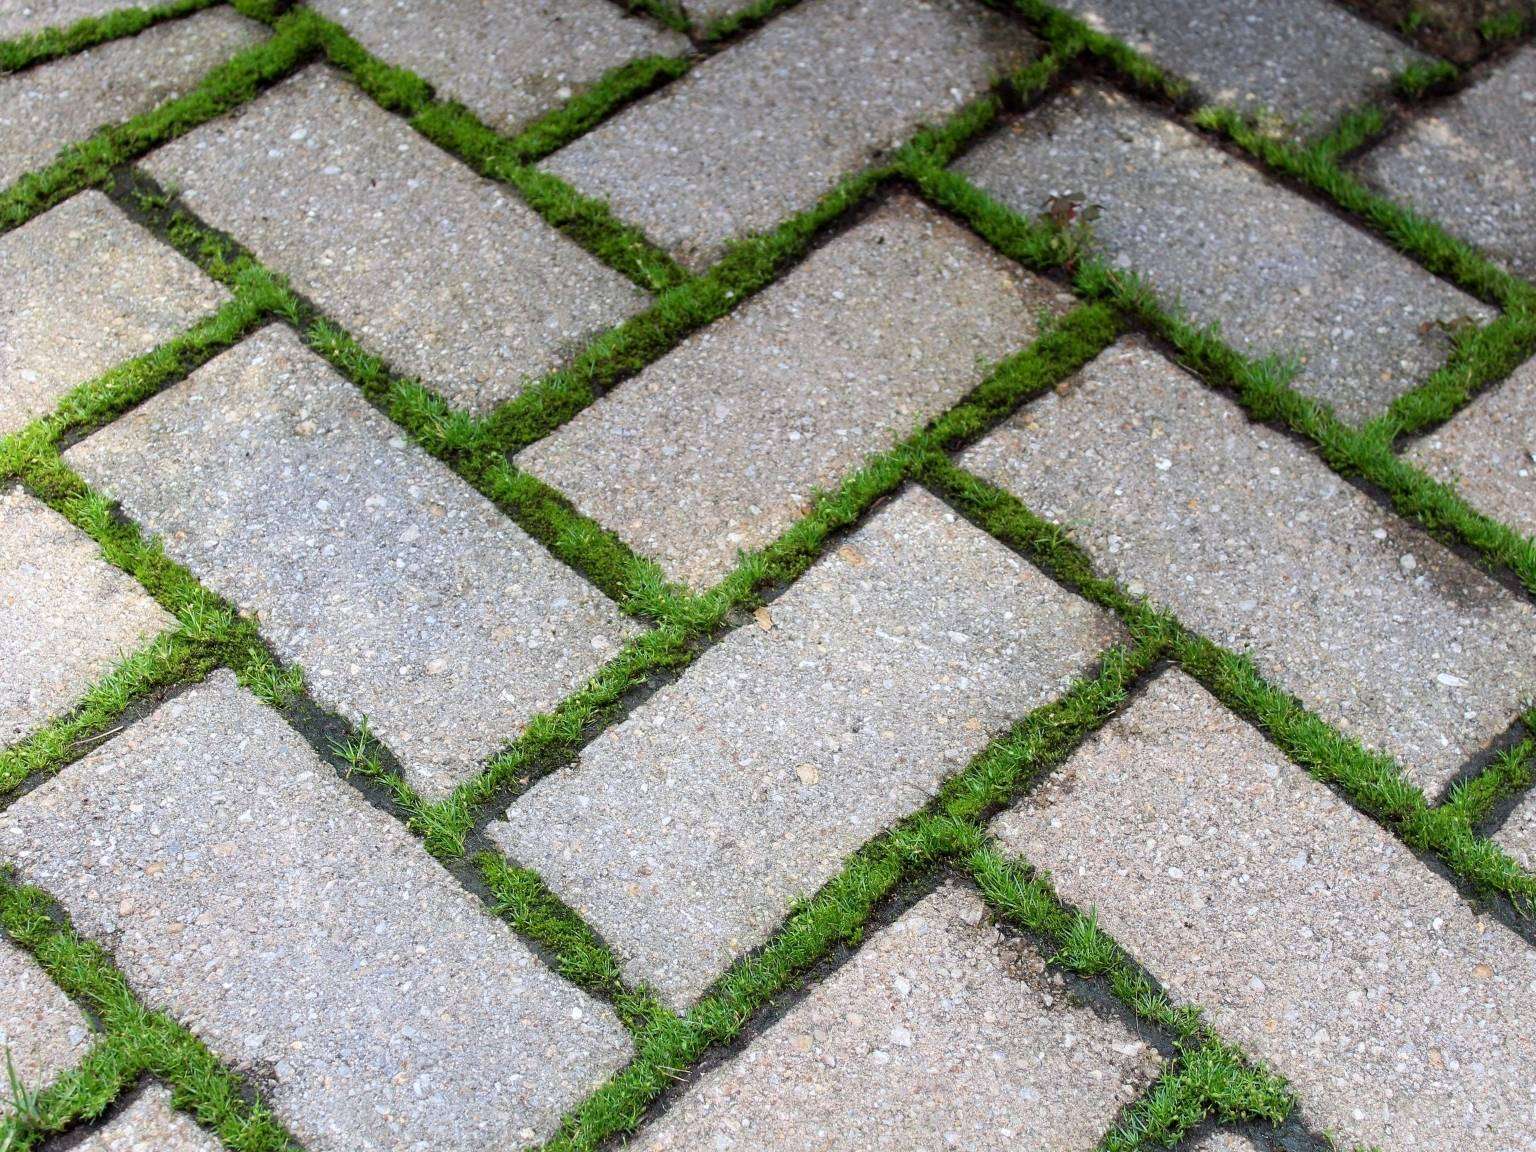 How To Remove Moss From Pavers